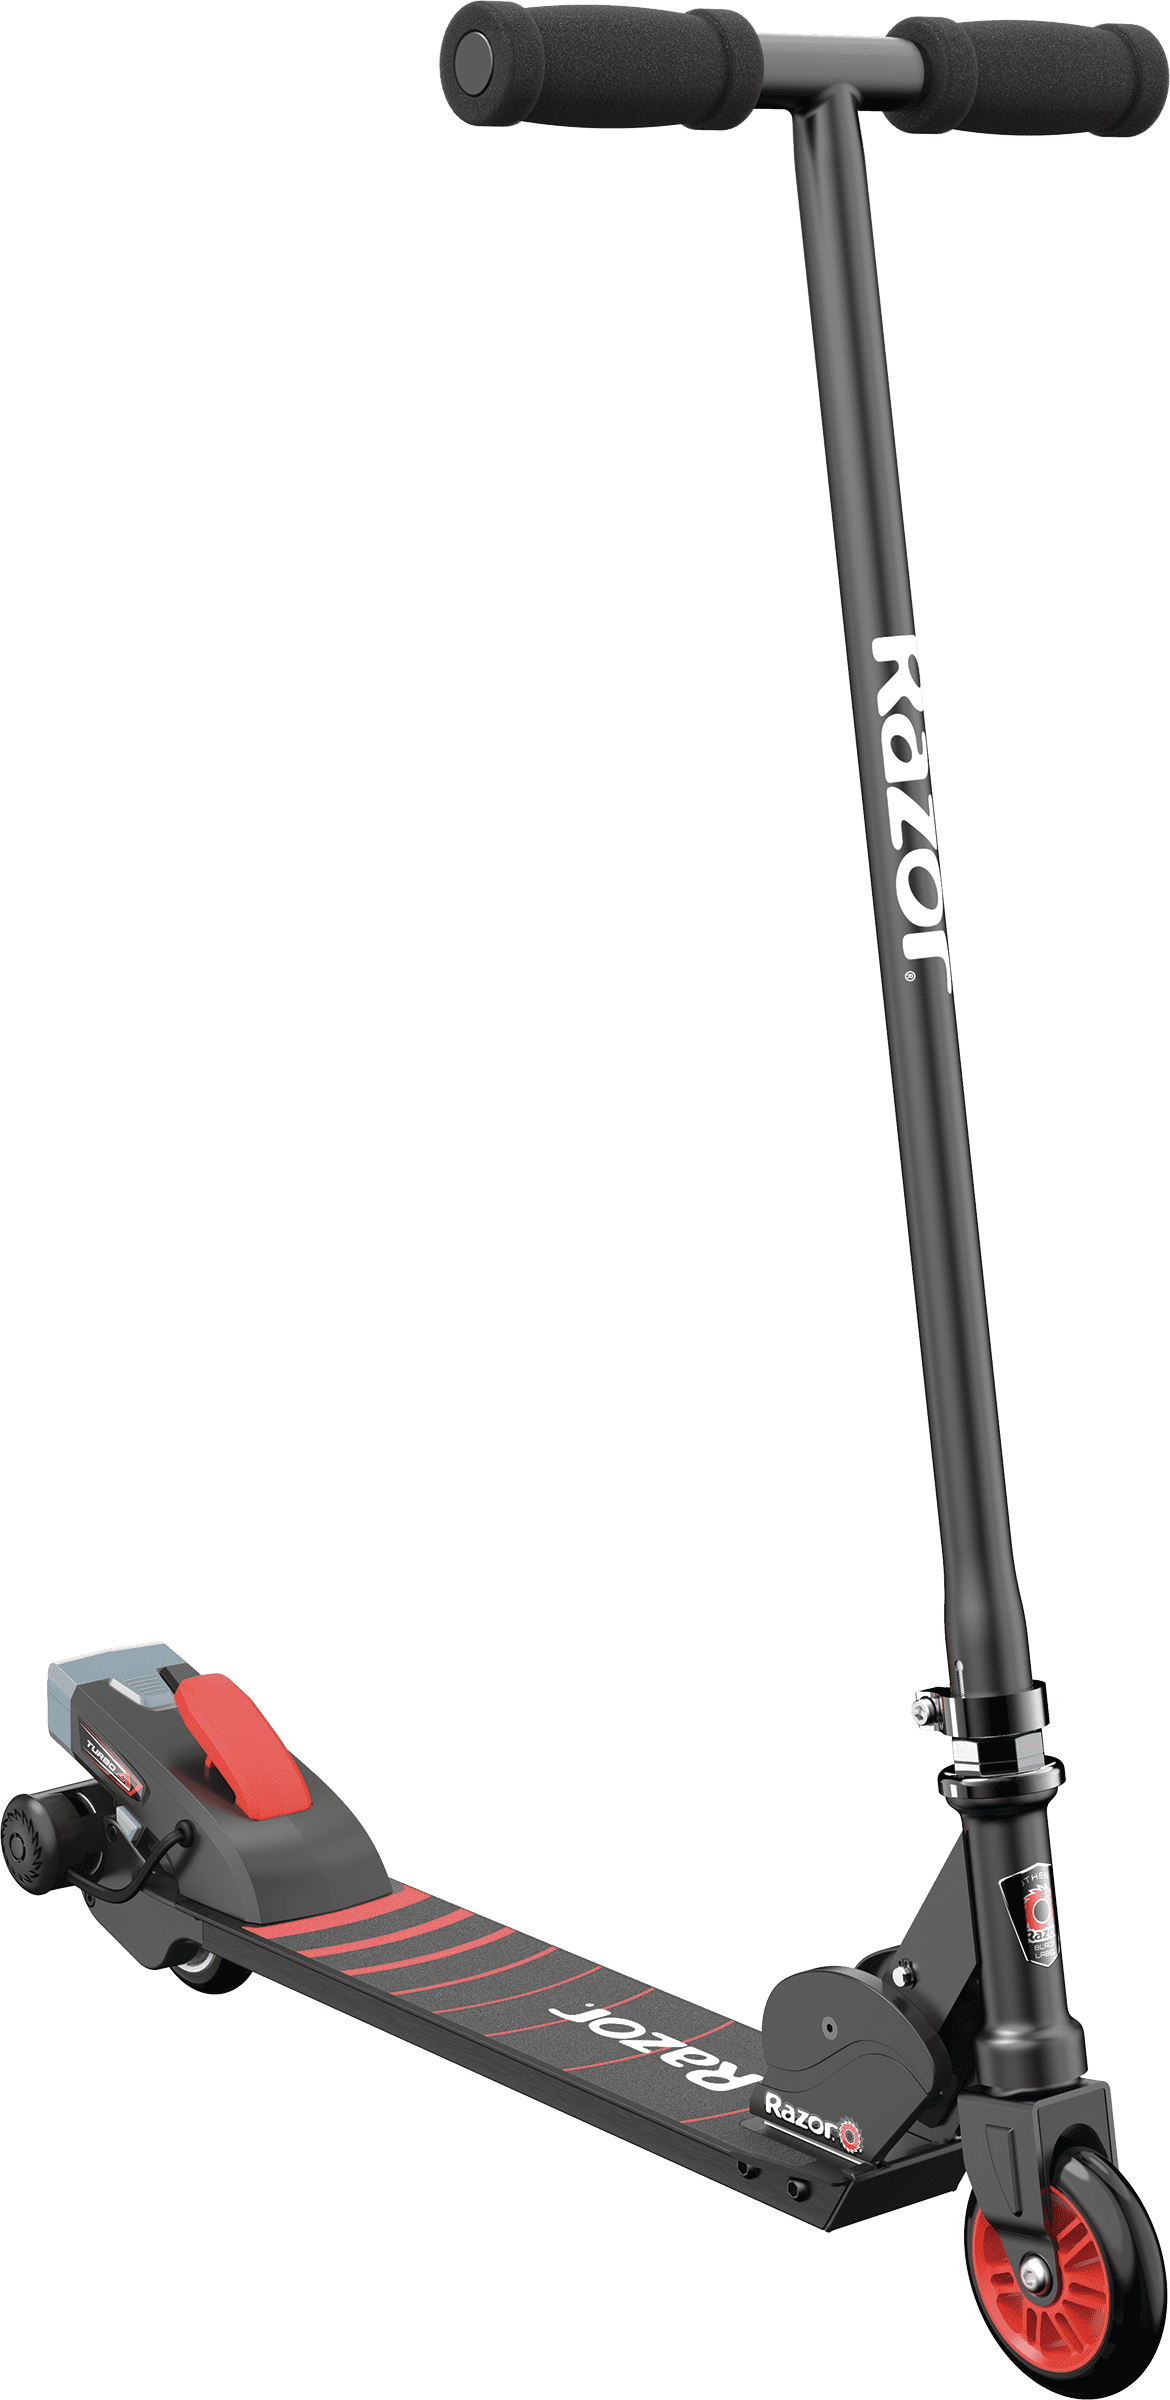 a scooter